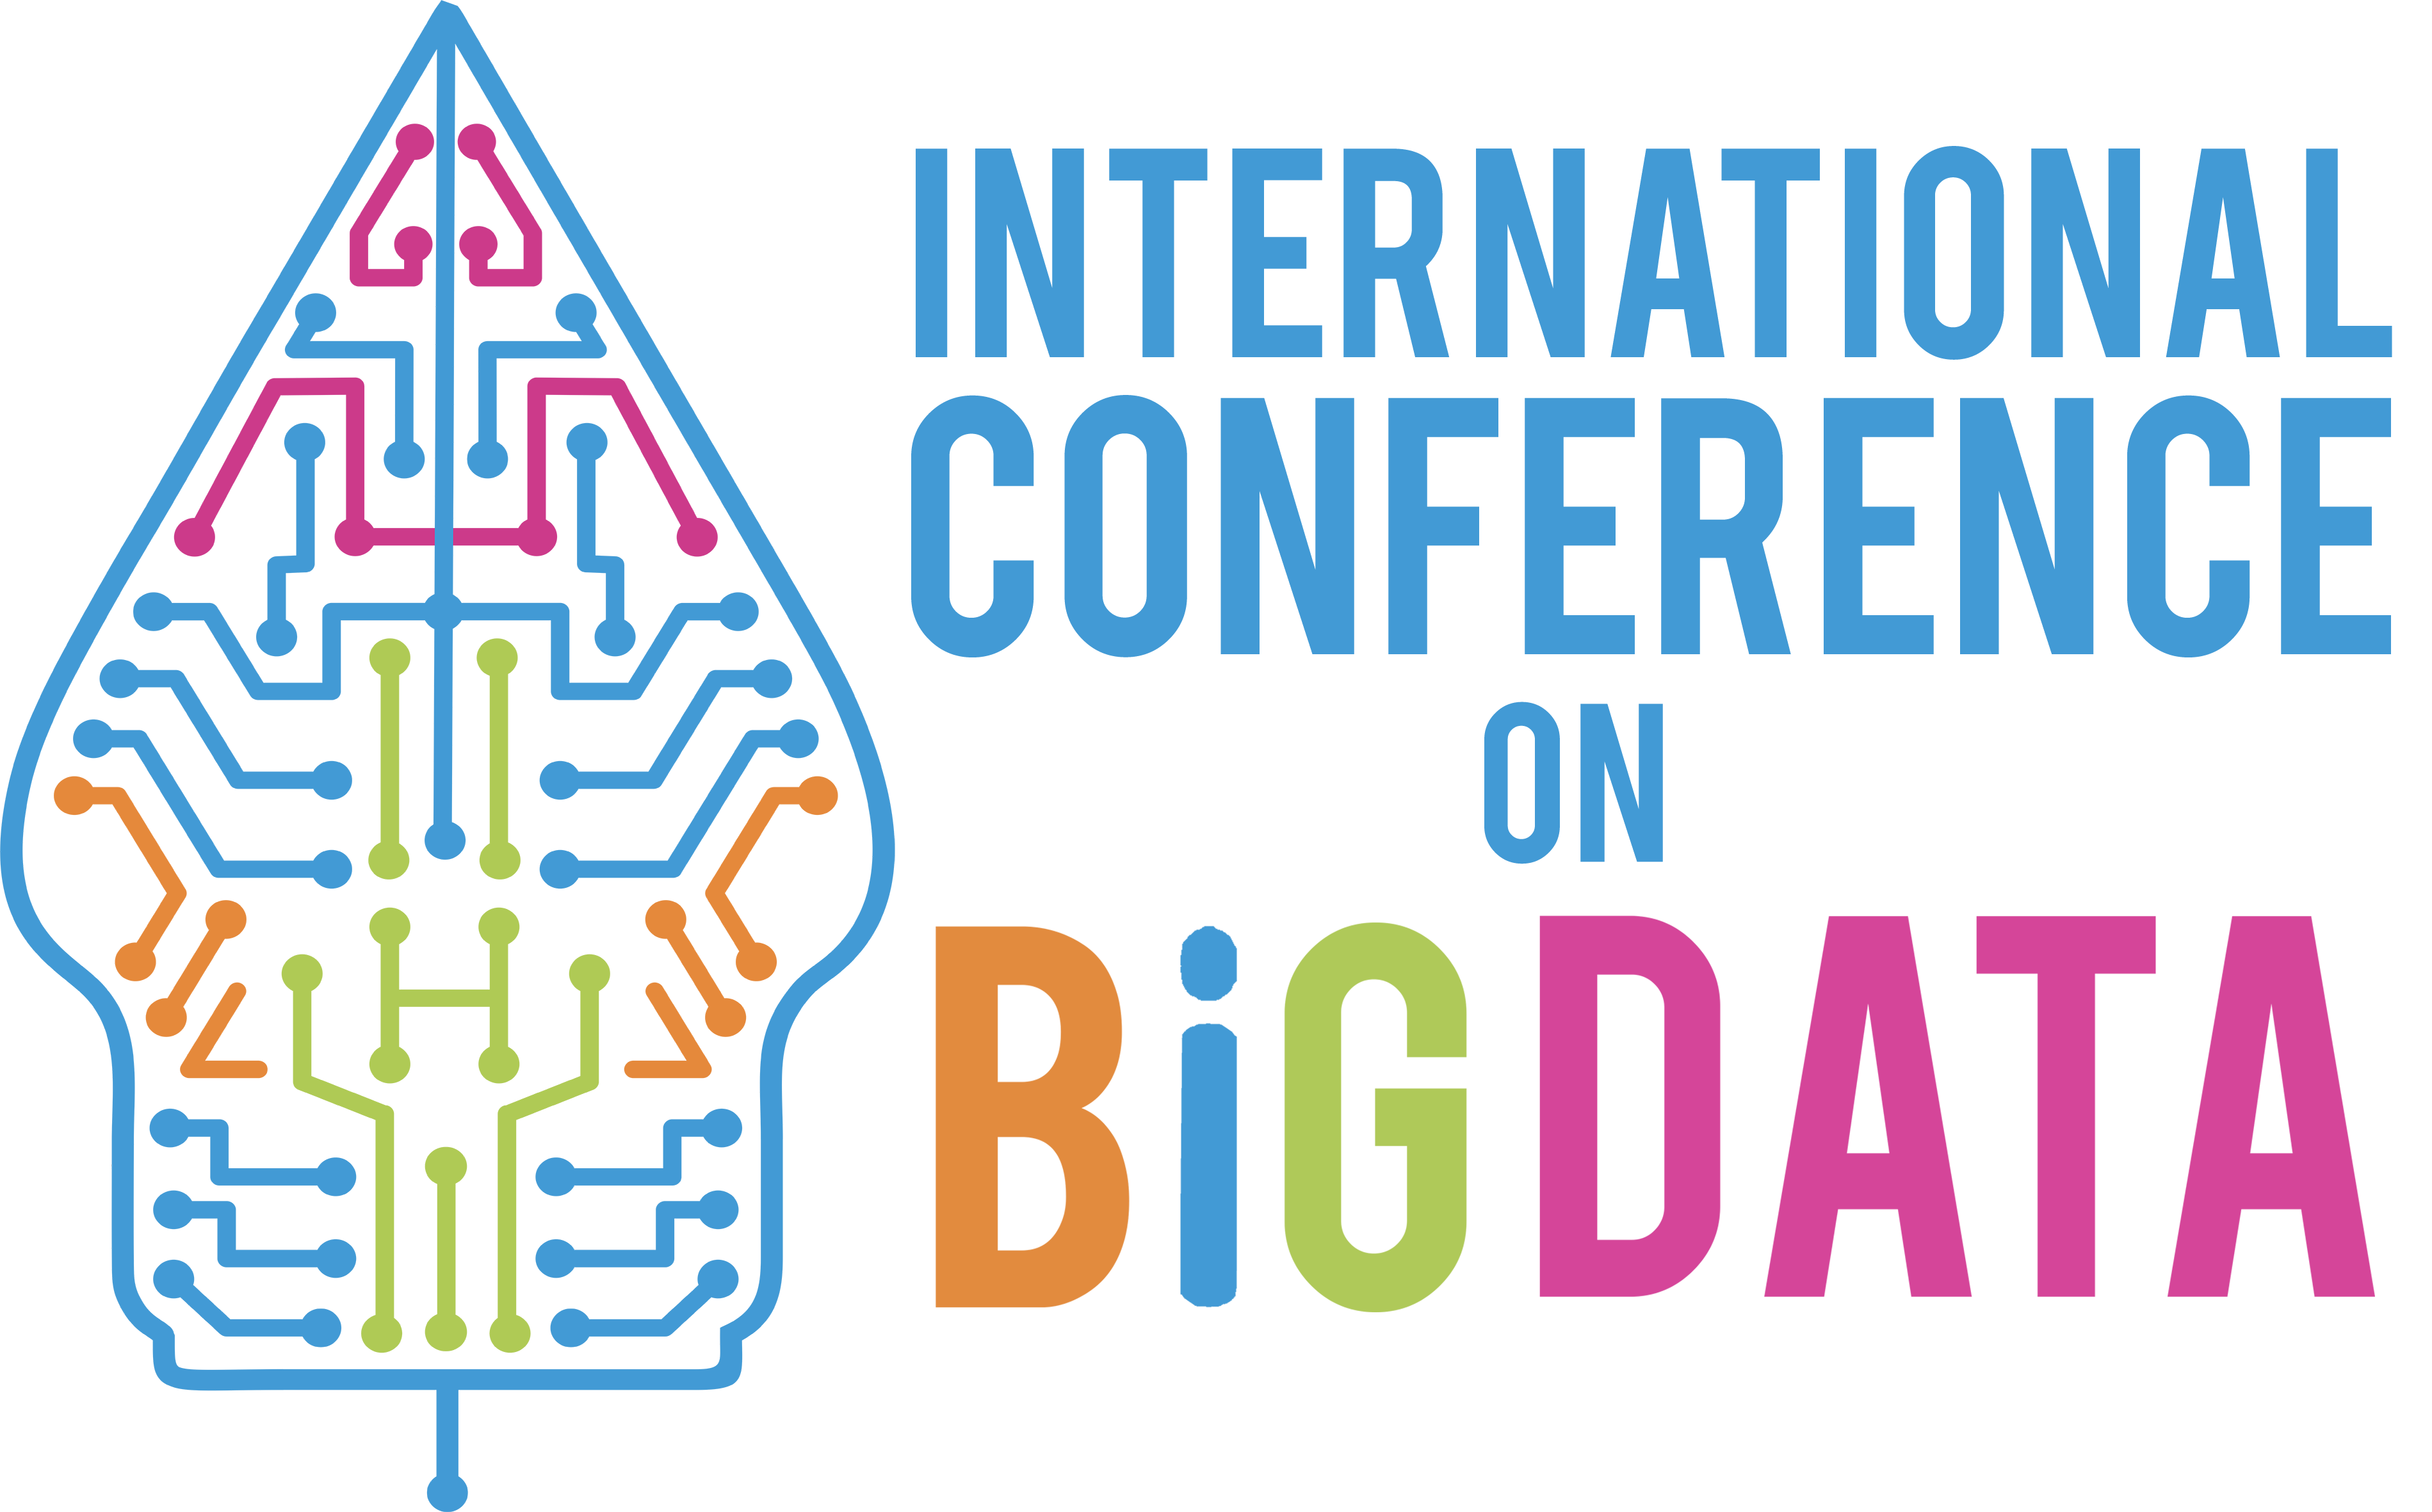 7th International Conference on Big Data and Data Science for Official Statistics